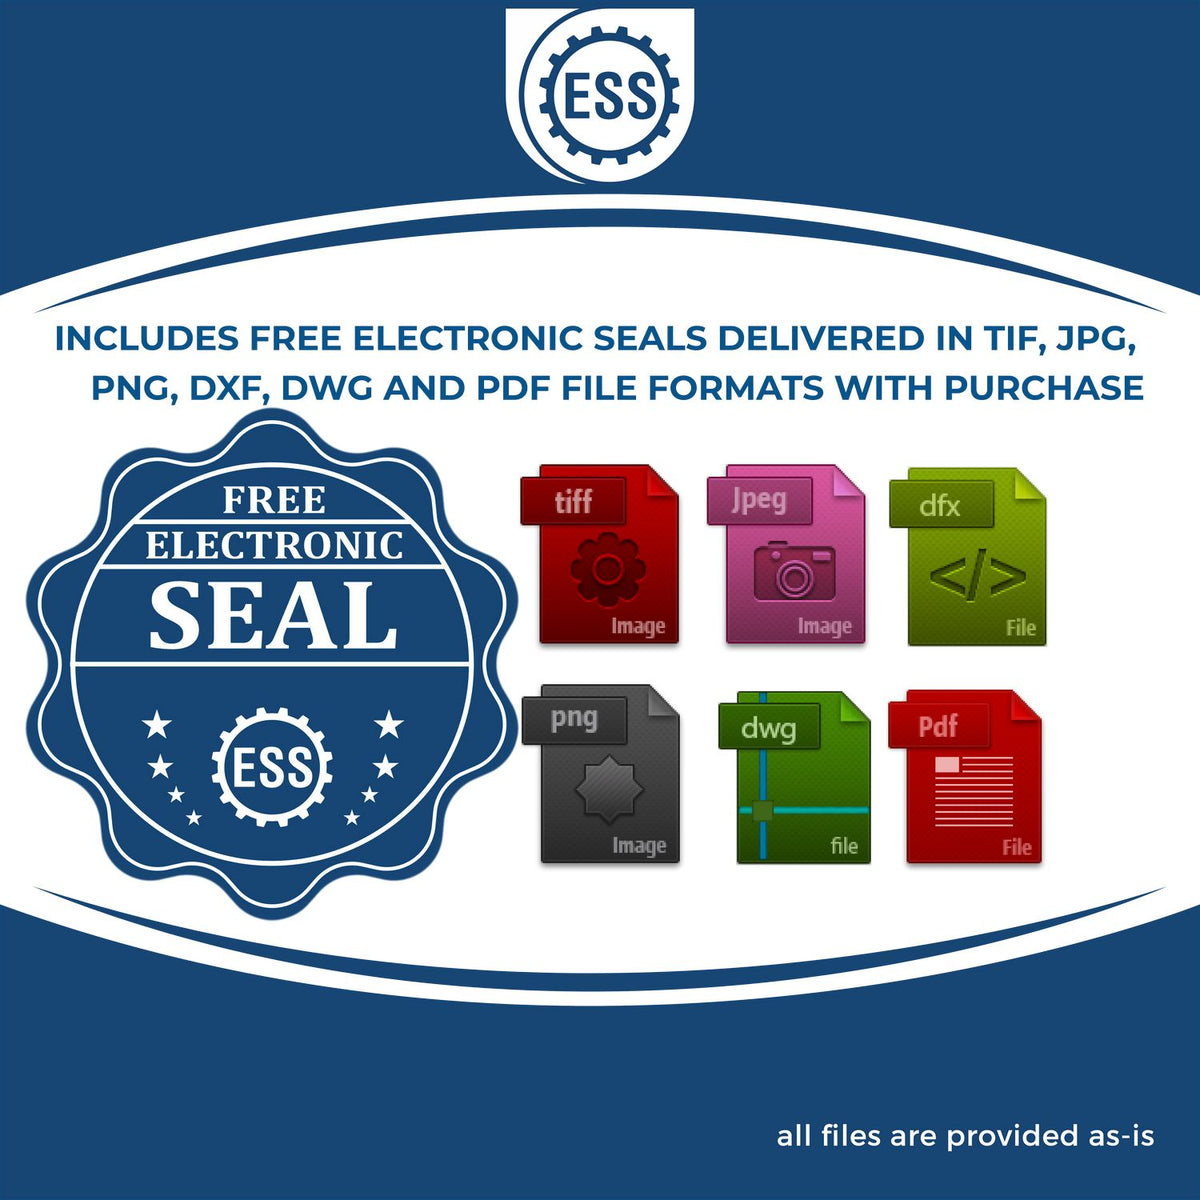 An infographic for the free electronic seal for the Slim Pre-Inked Guam Professional Engineer Seal Stamp illustrating the different file type icons such as DXF, DWG, TIF, JPG and PNG.